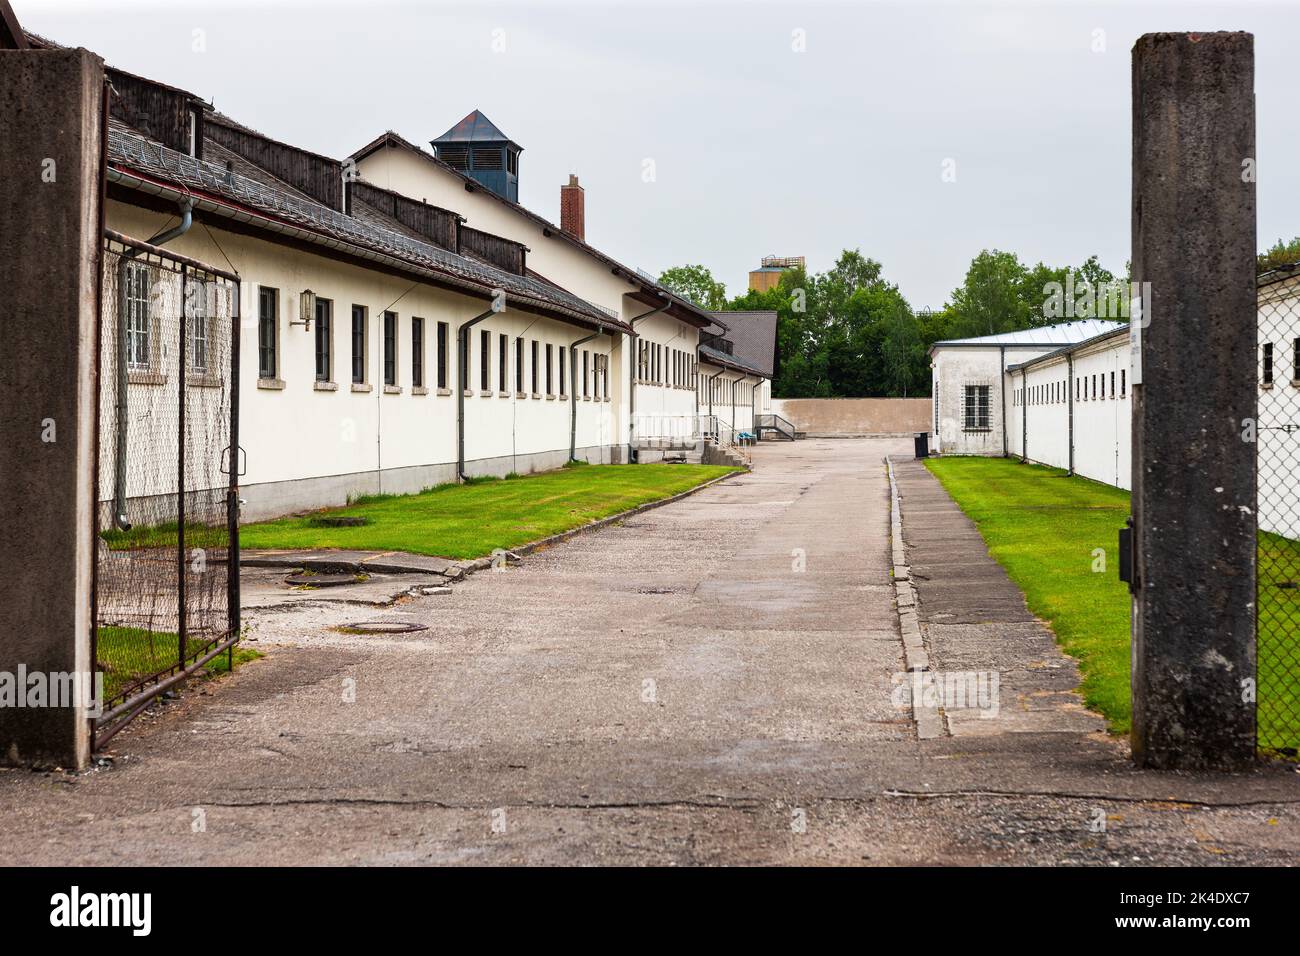 Dachau, Germany - July 4, 2011 : Dachau Concentration Camp Memorial Site. Nazi concentration camp from 1933 to 1945. Gate between two prison cell buil Stock Photo